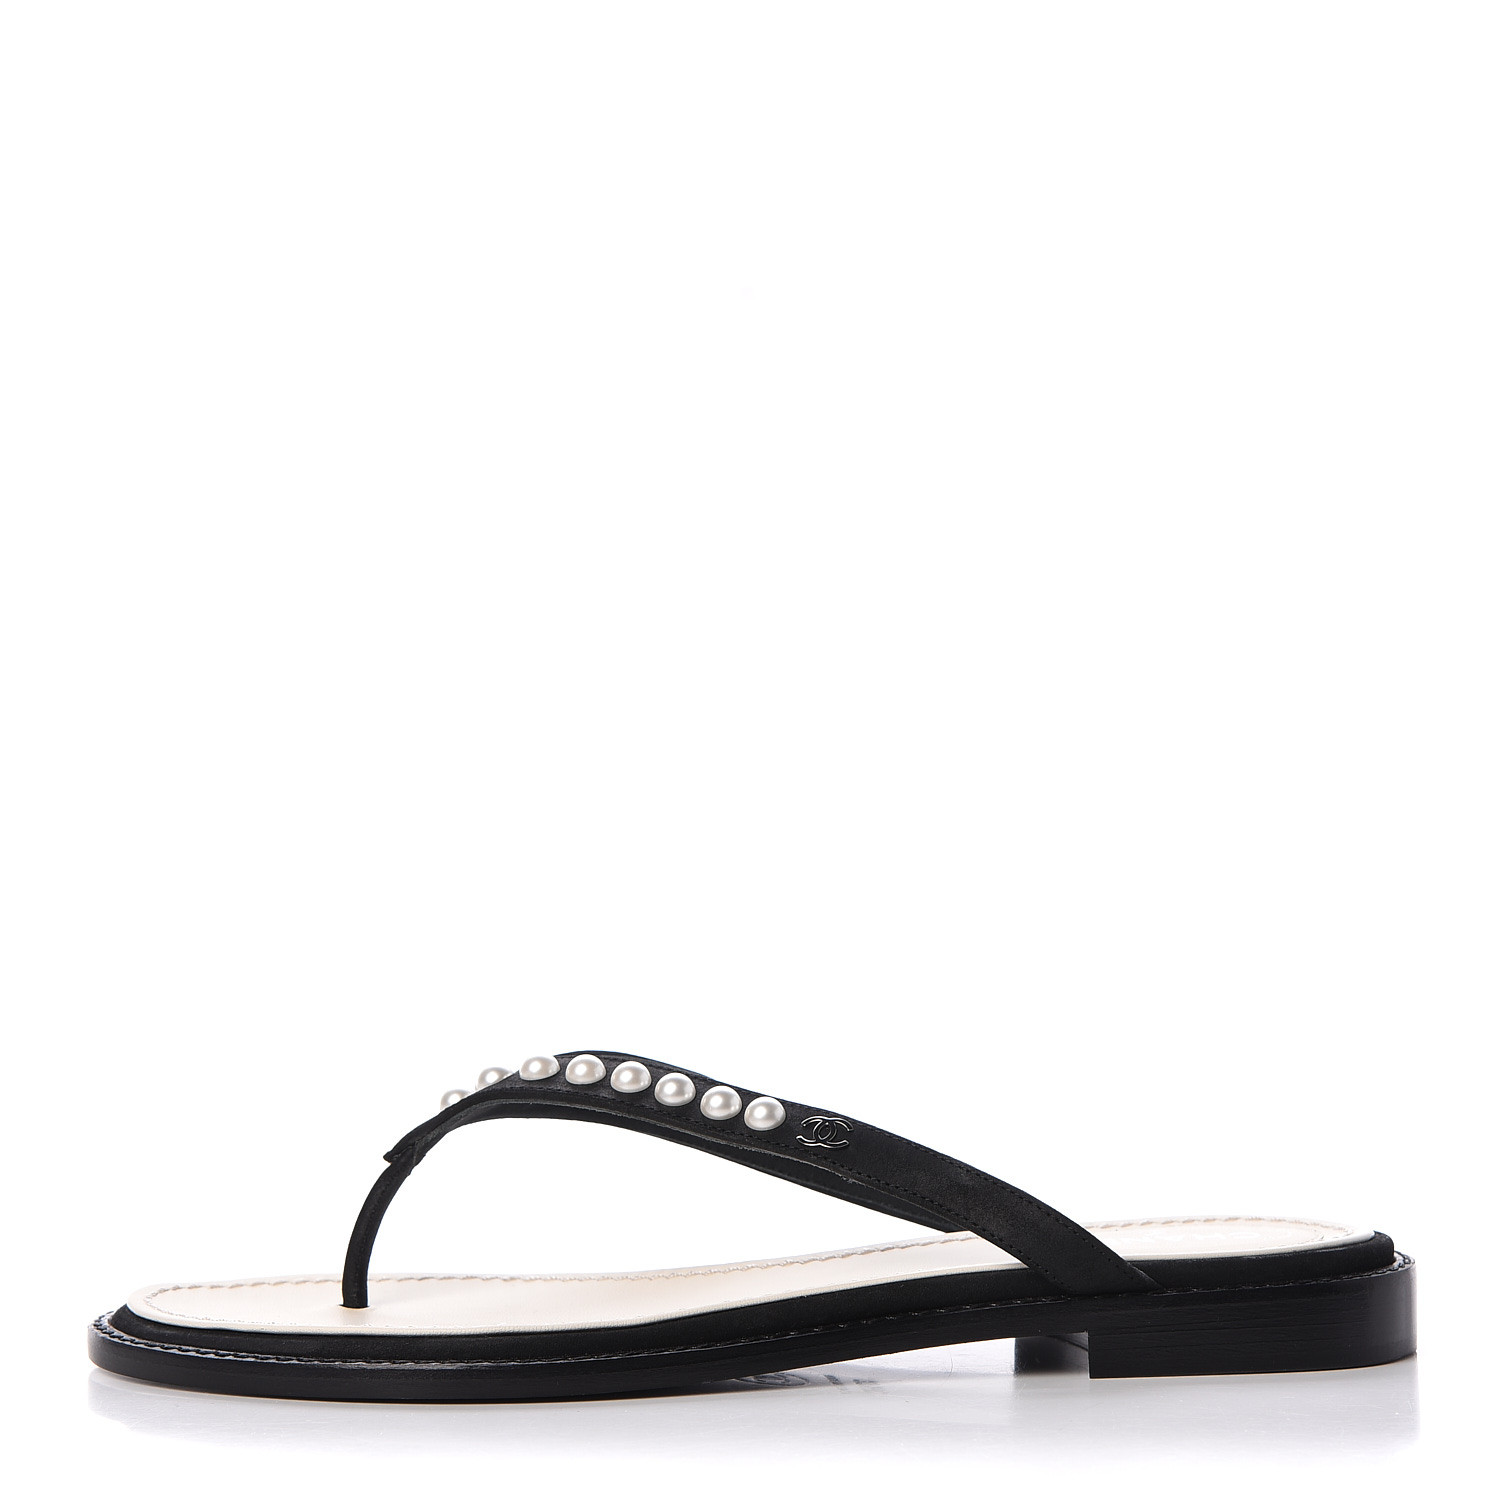 CHANEL Suede Pearl Thong Sandals 37.5 Black 438132